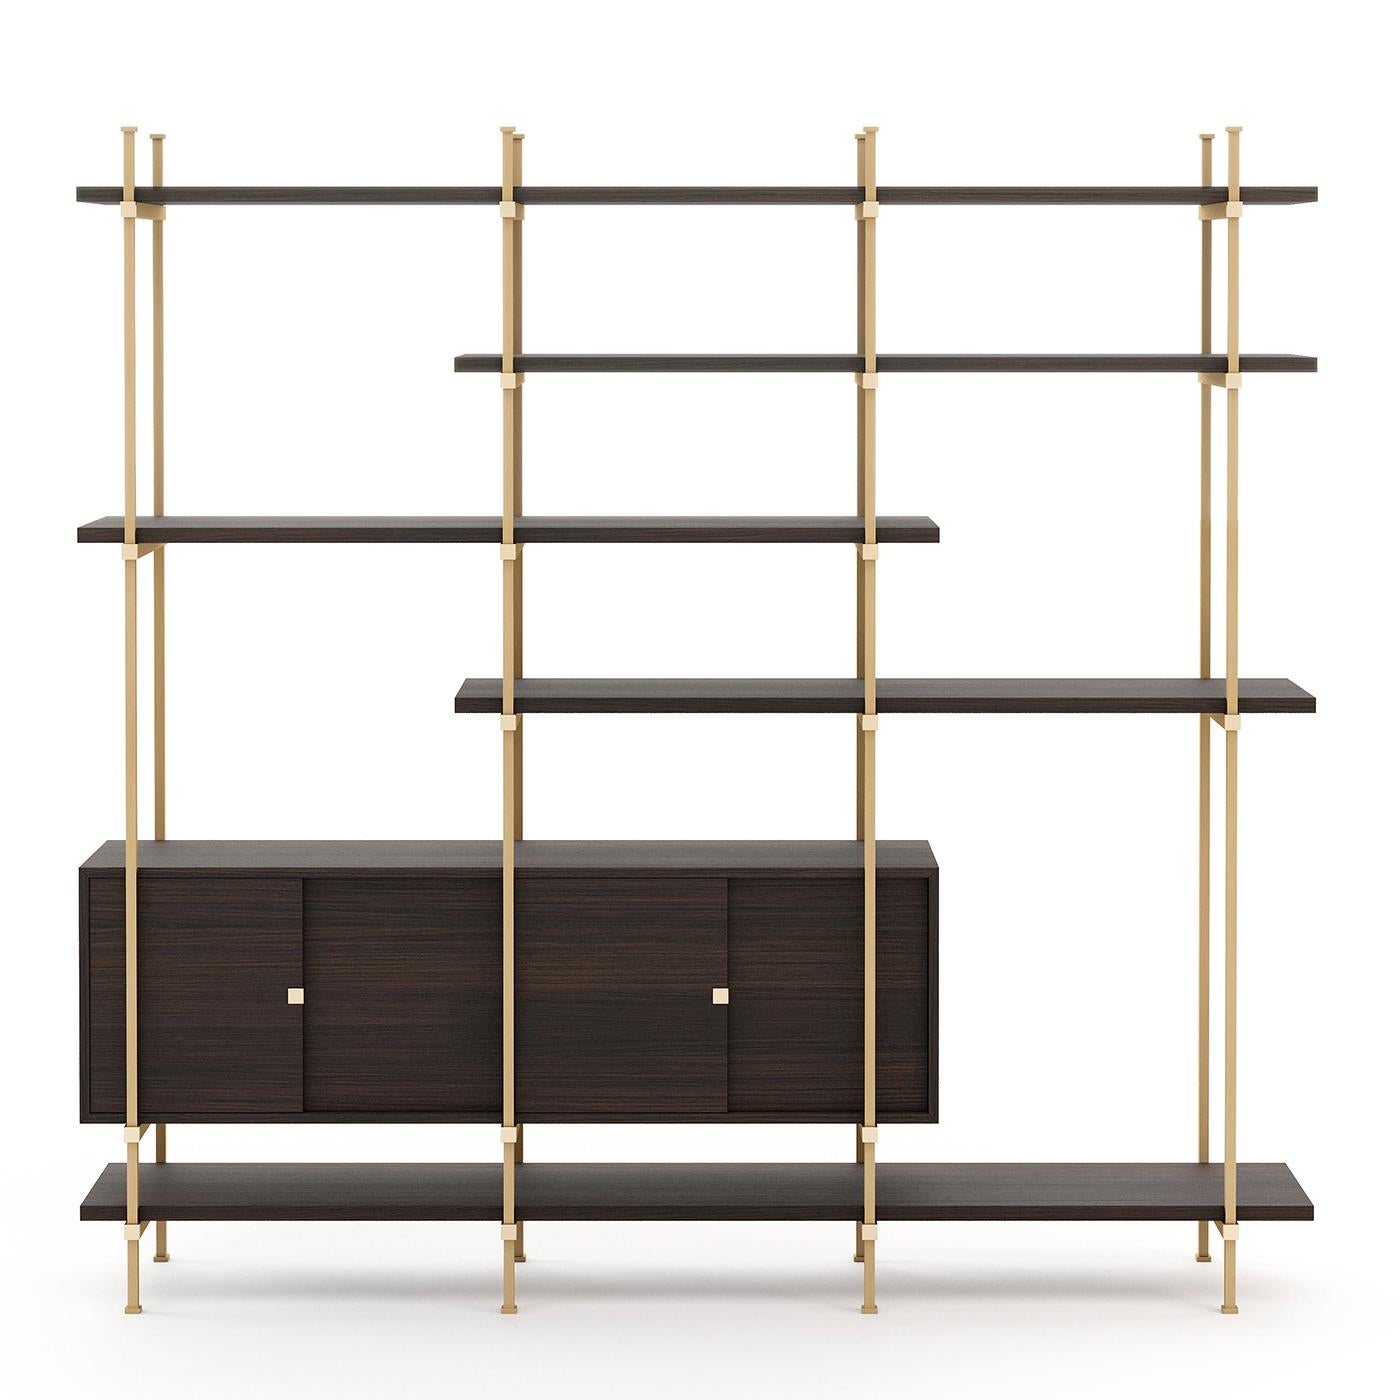 Bookcase Excelior with structure in smocked eucalyptus veneered
wood in matte finish, with 5 shelves, with chest compartment with 4
doors with easy glide system. 
With vertical structure in polished stainless steel in gold finish.
Also available